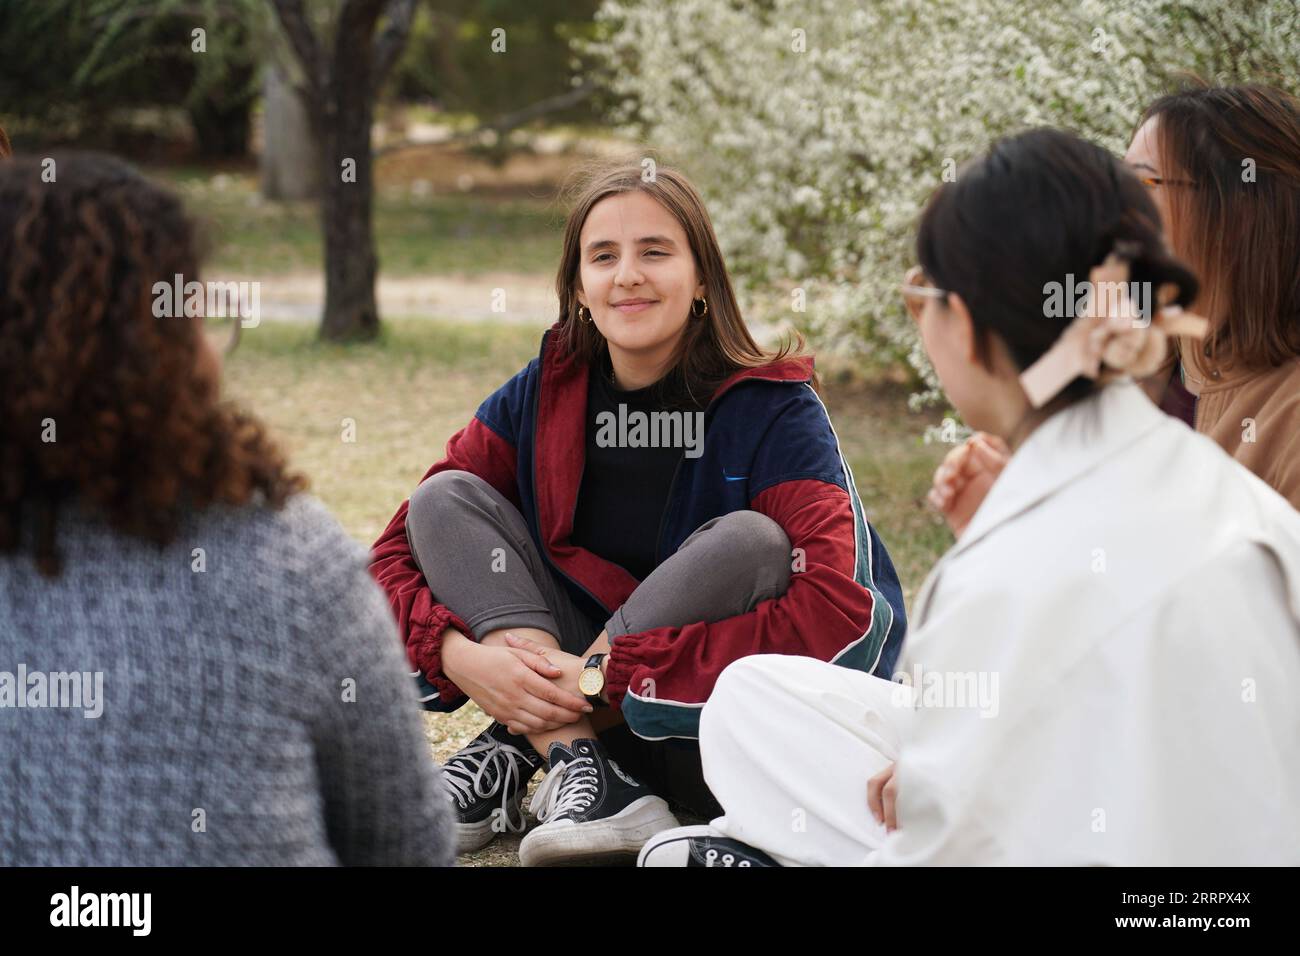 230415 -- BEIJING, April 15, 2023 -- Maria 2nd L chats with schoolmates at Peking University in Beijing, capital of China, March 31, 2023. Maria Eduarda Variani, Rafaela Viana dos Santos, Manuela Boiteux Pestana, and Marco Andre Rocha Germano are Brazilian students studying in the Master of China Studies program at the Yenching Academy of Peking University in China. The four of them have been interested in Chinese culture since they were young. After arriving in Beijing, they have been impressed by the Chinese capital s profound cultural heritage, convenient public services, and fabulous citys Stock Photo